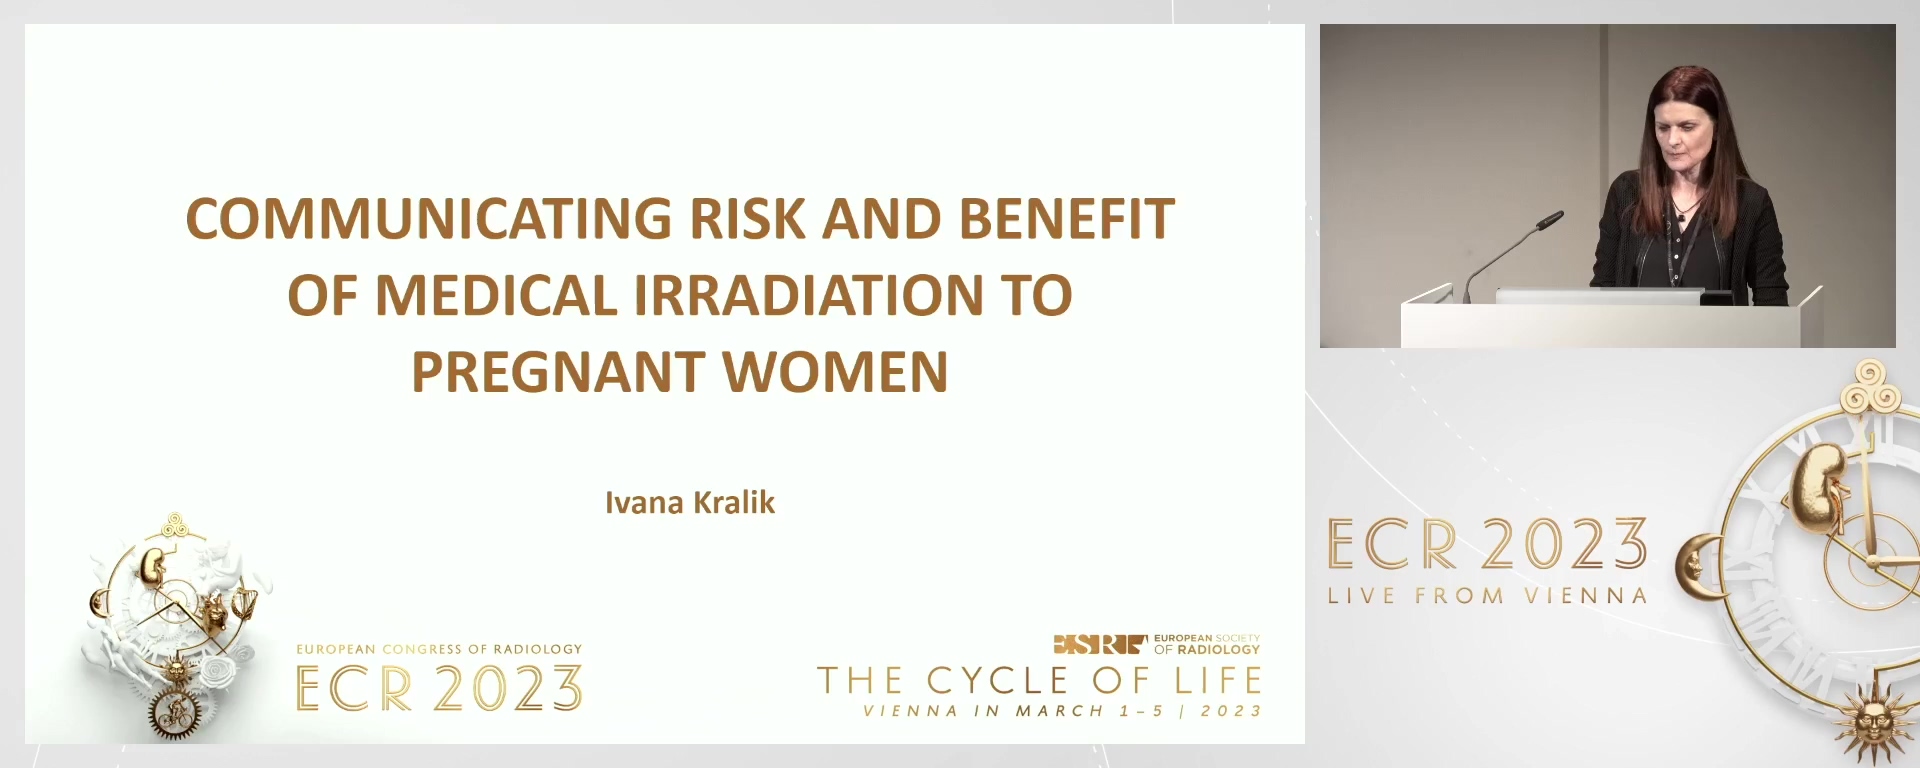 Communicating risk and benefit of medical irradiation to pregnant women